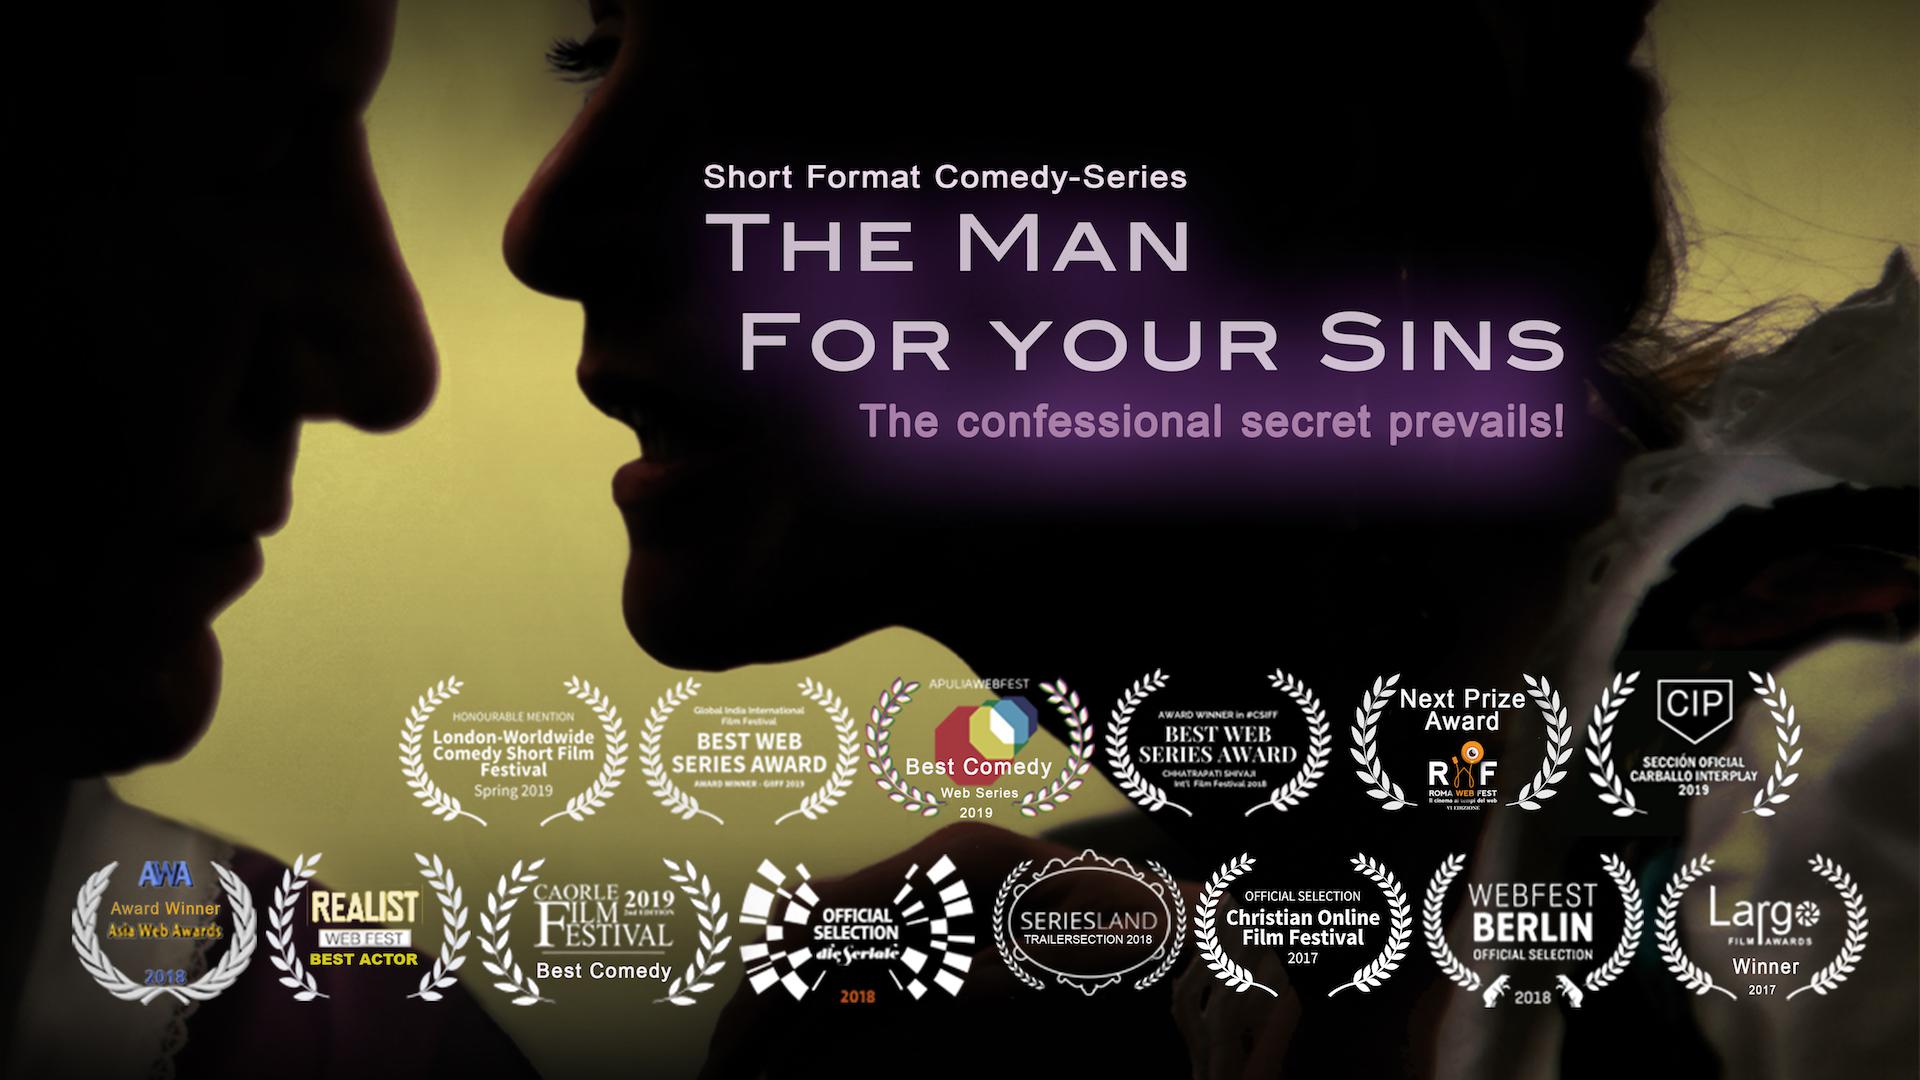 The Man for Your Sins - Season 3